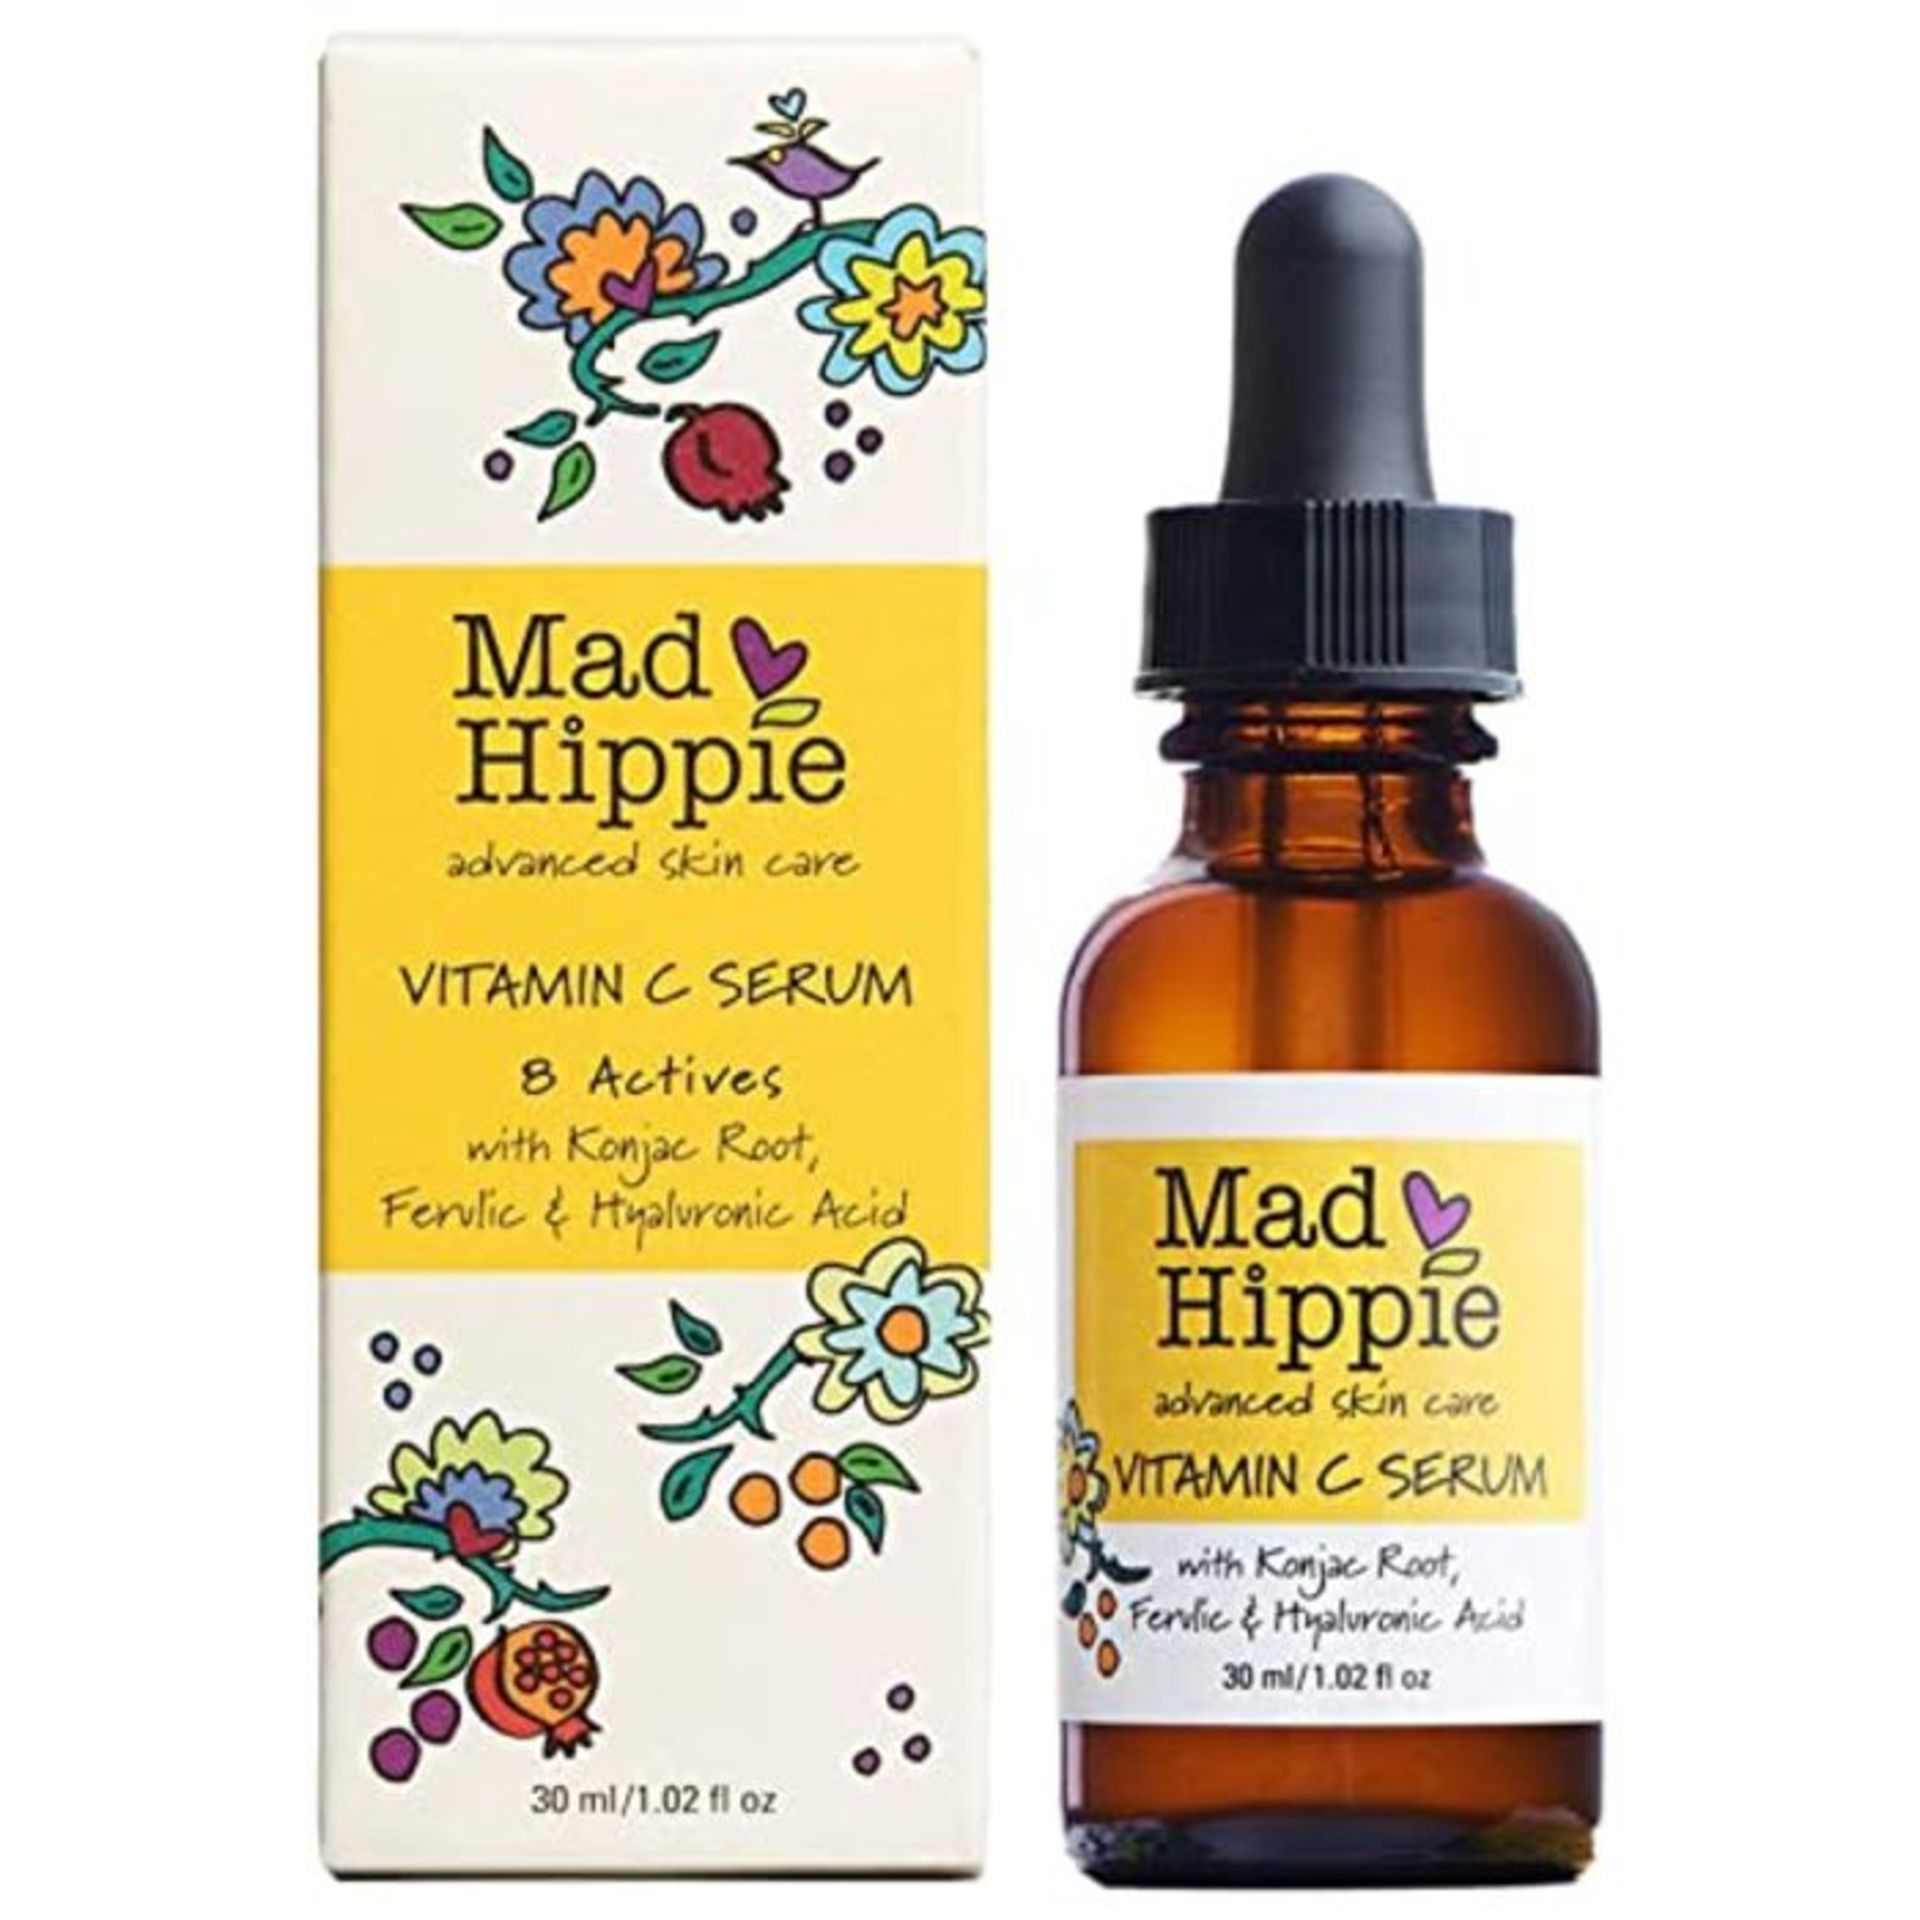 Mad Hippie Skin Care Products 1.02 Fluid Ounce Vitamin C Serum